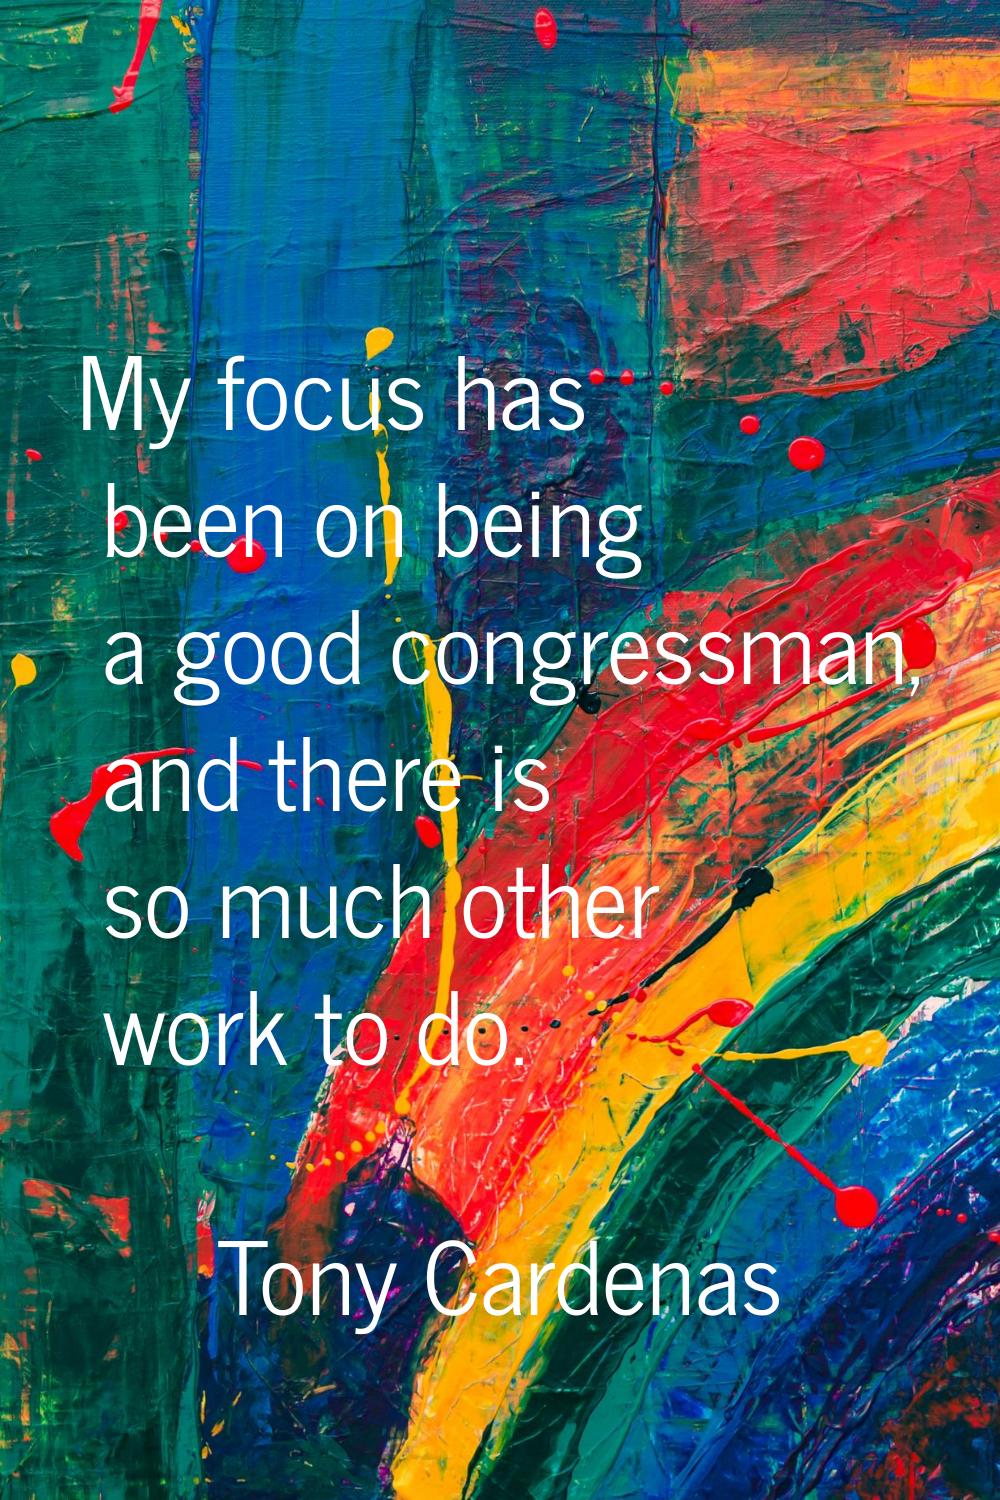 My focus has been on being a good congressman, and there is so much other work to do.